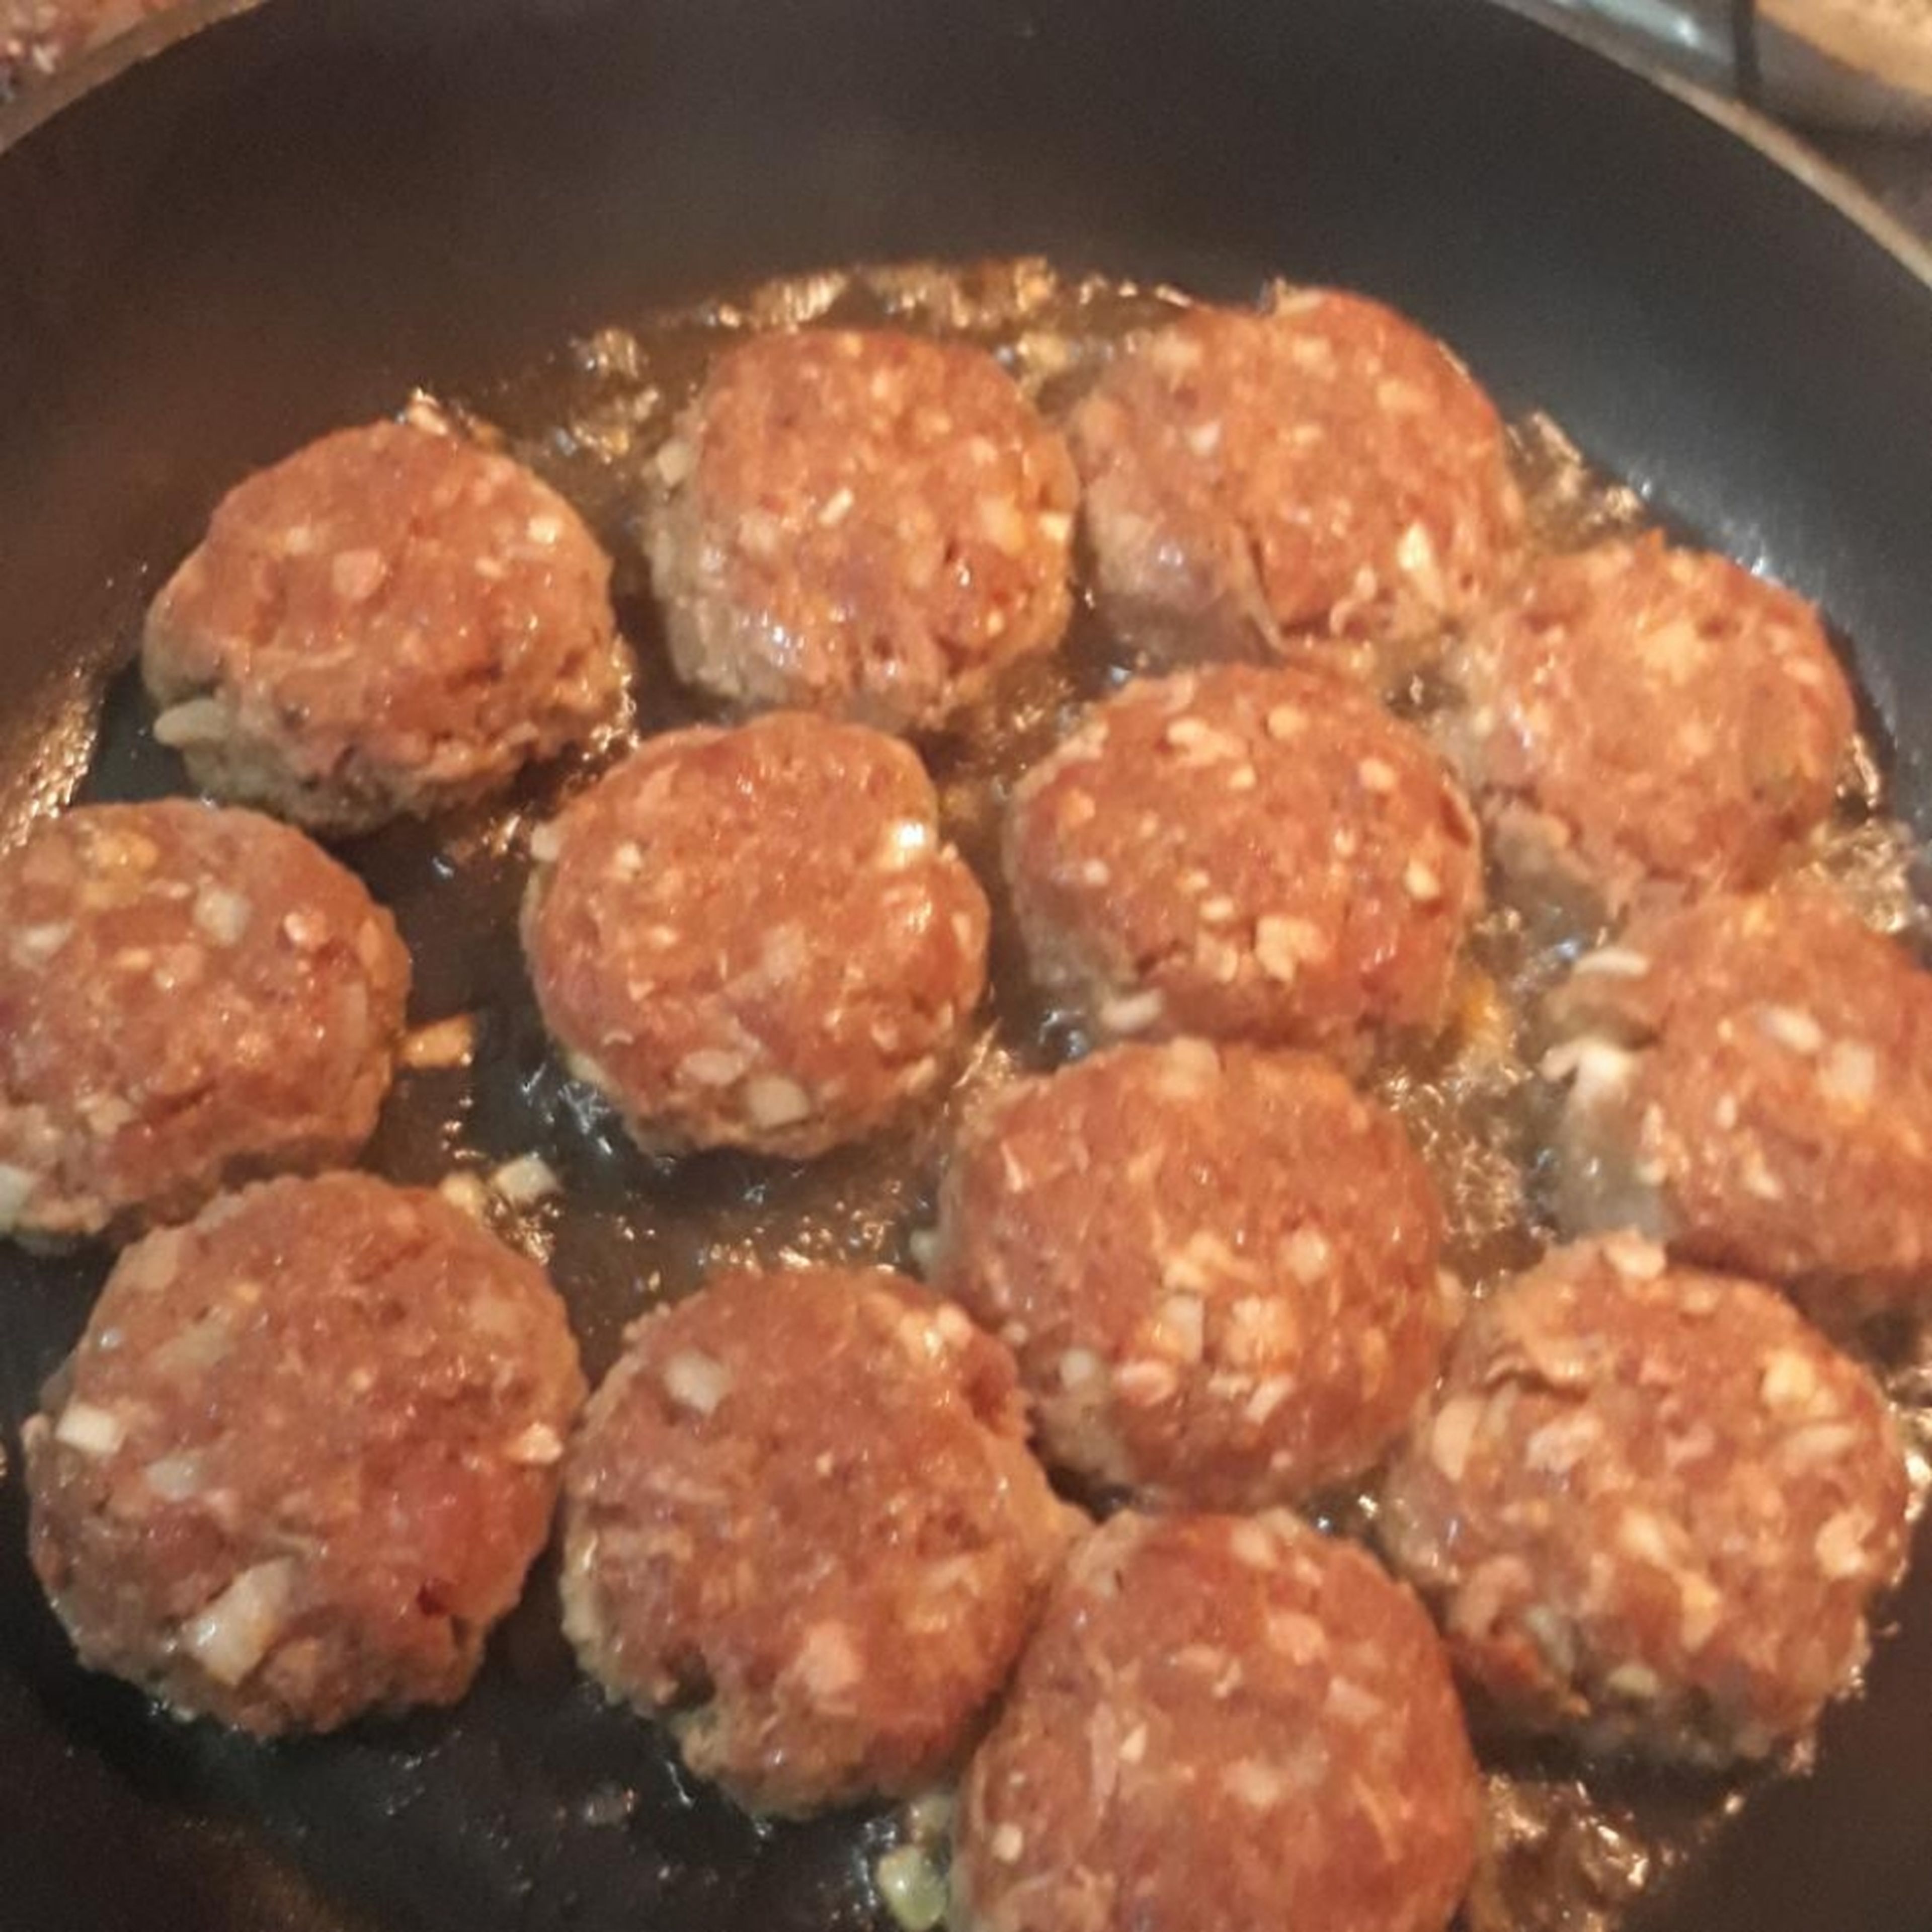 Putt a little oil in your pan and wait when the pan get hot enough put your meatballs in it.